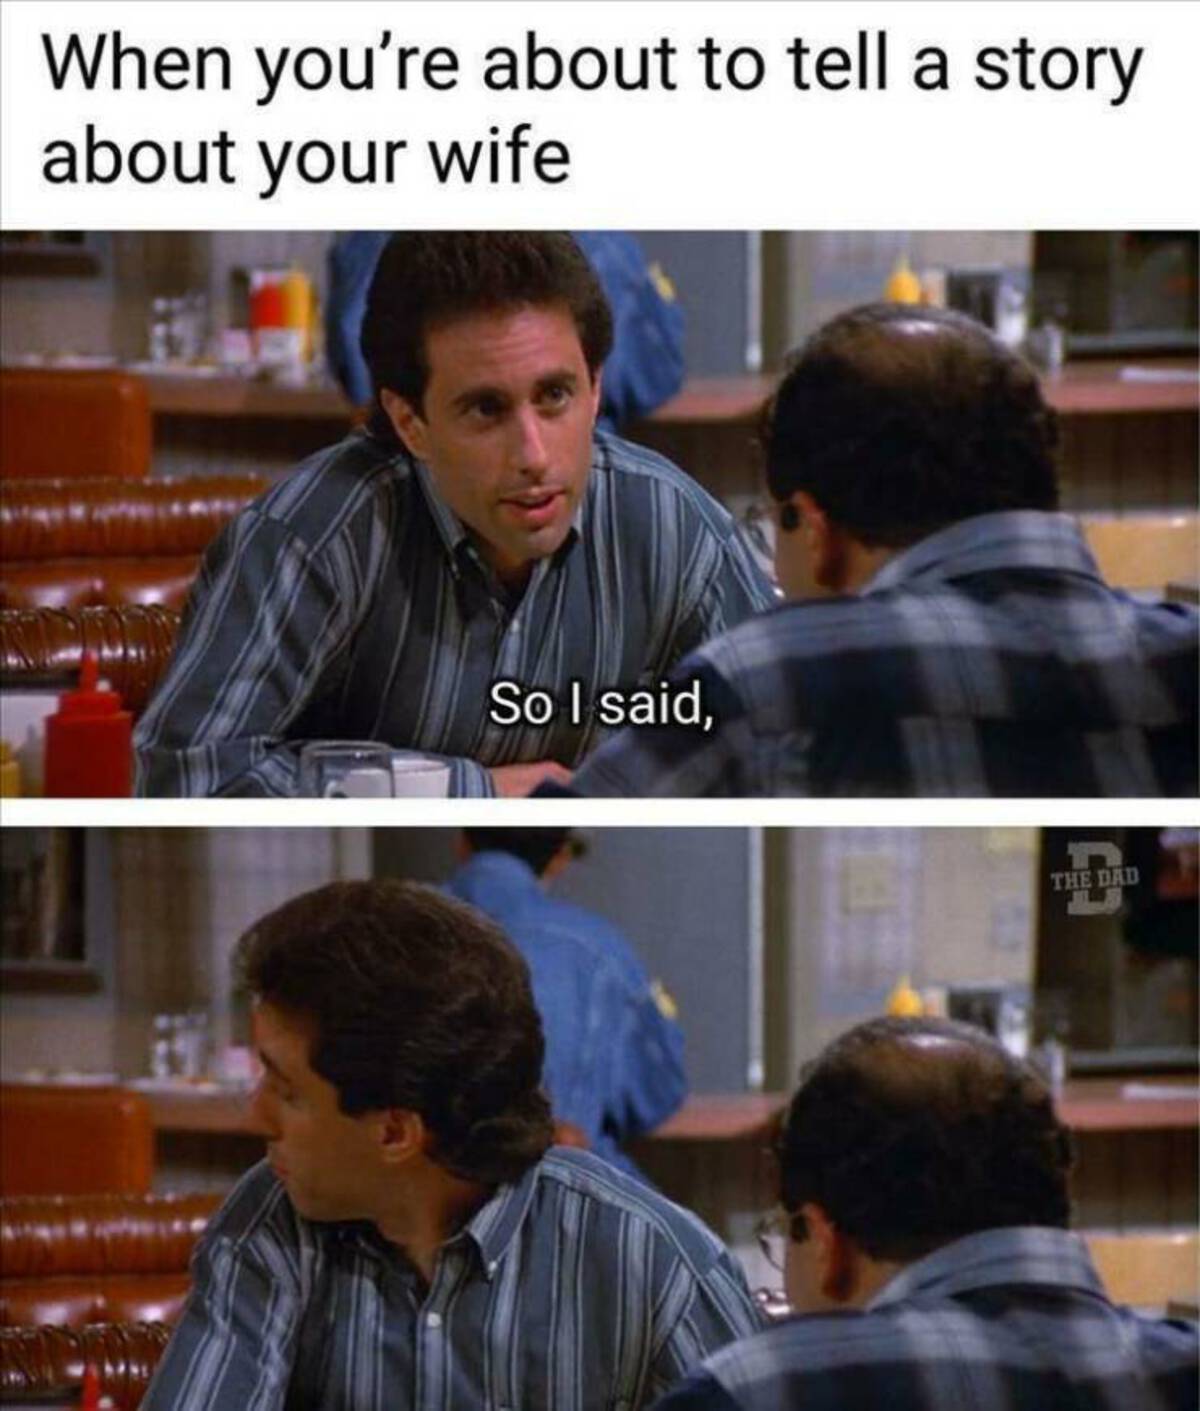 tell a story meme - When you're about to tell a story about your wife So I said, The Dad D